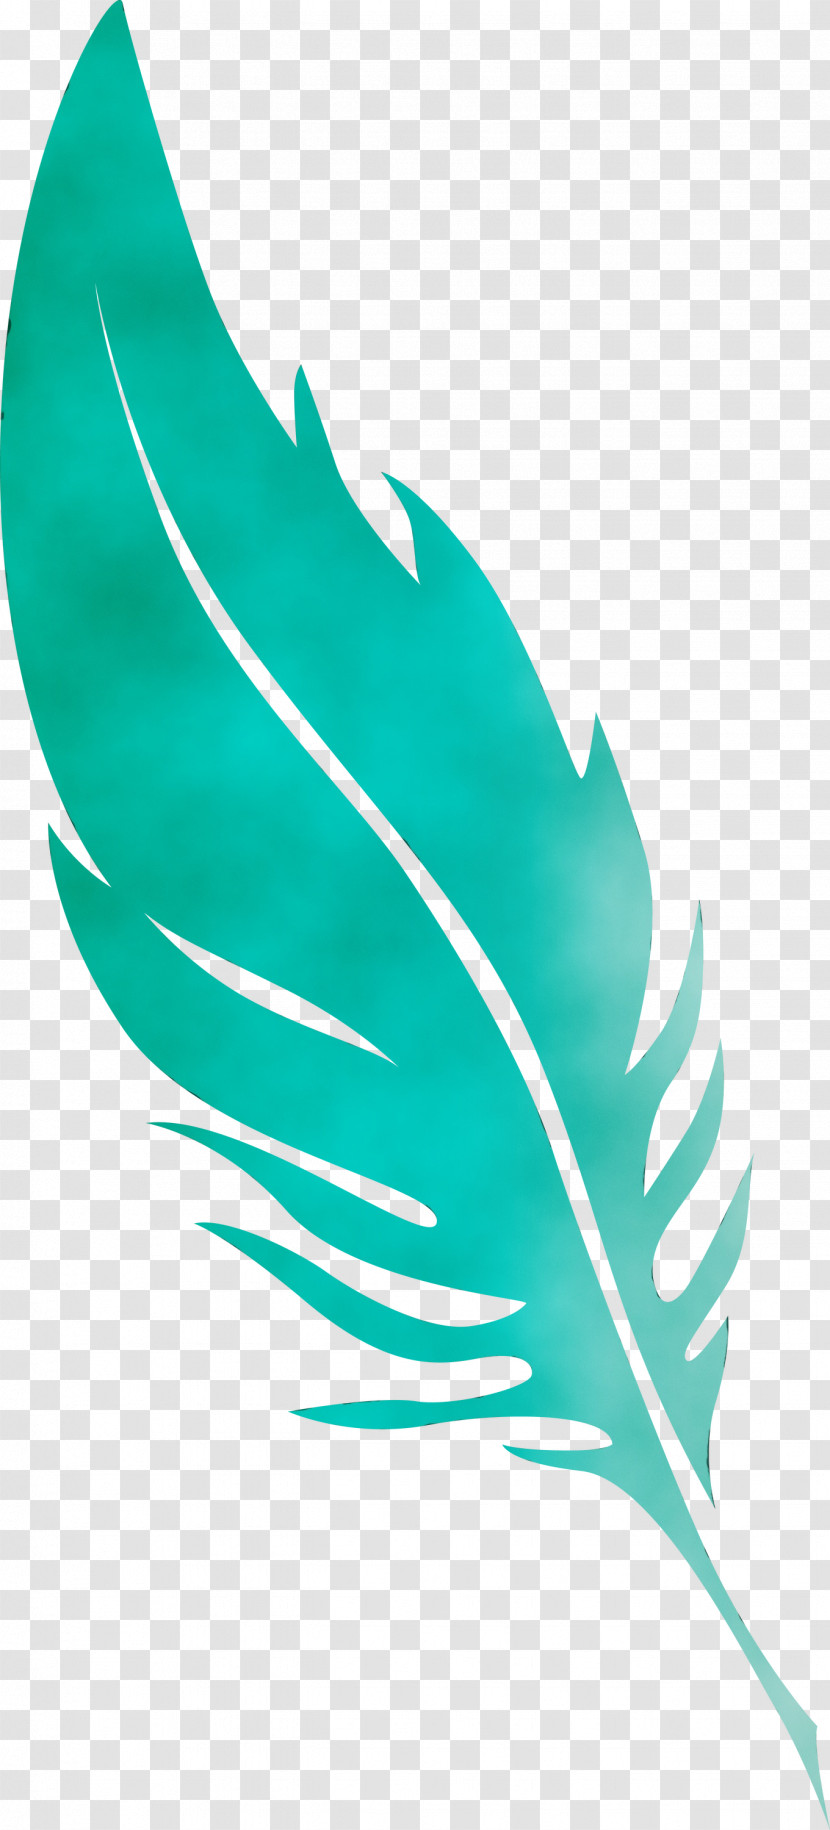 Leaf Green Quill Line Plant Structure Transparent PNG